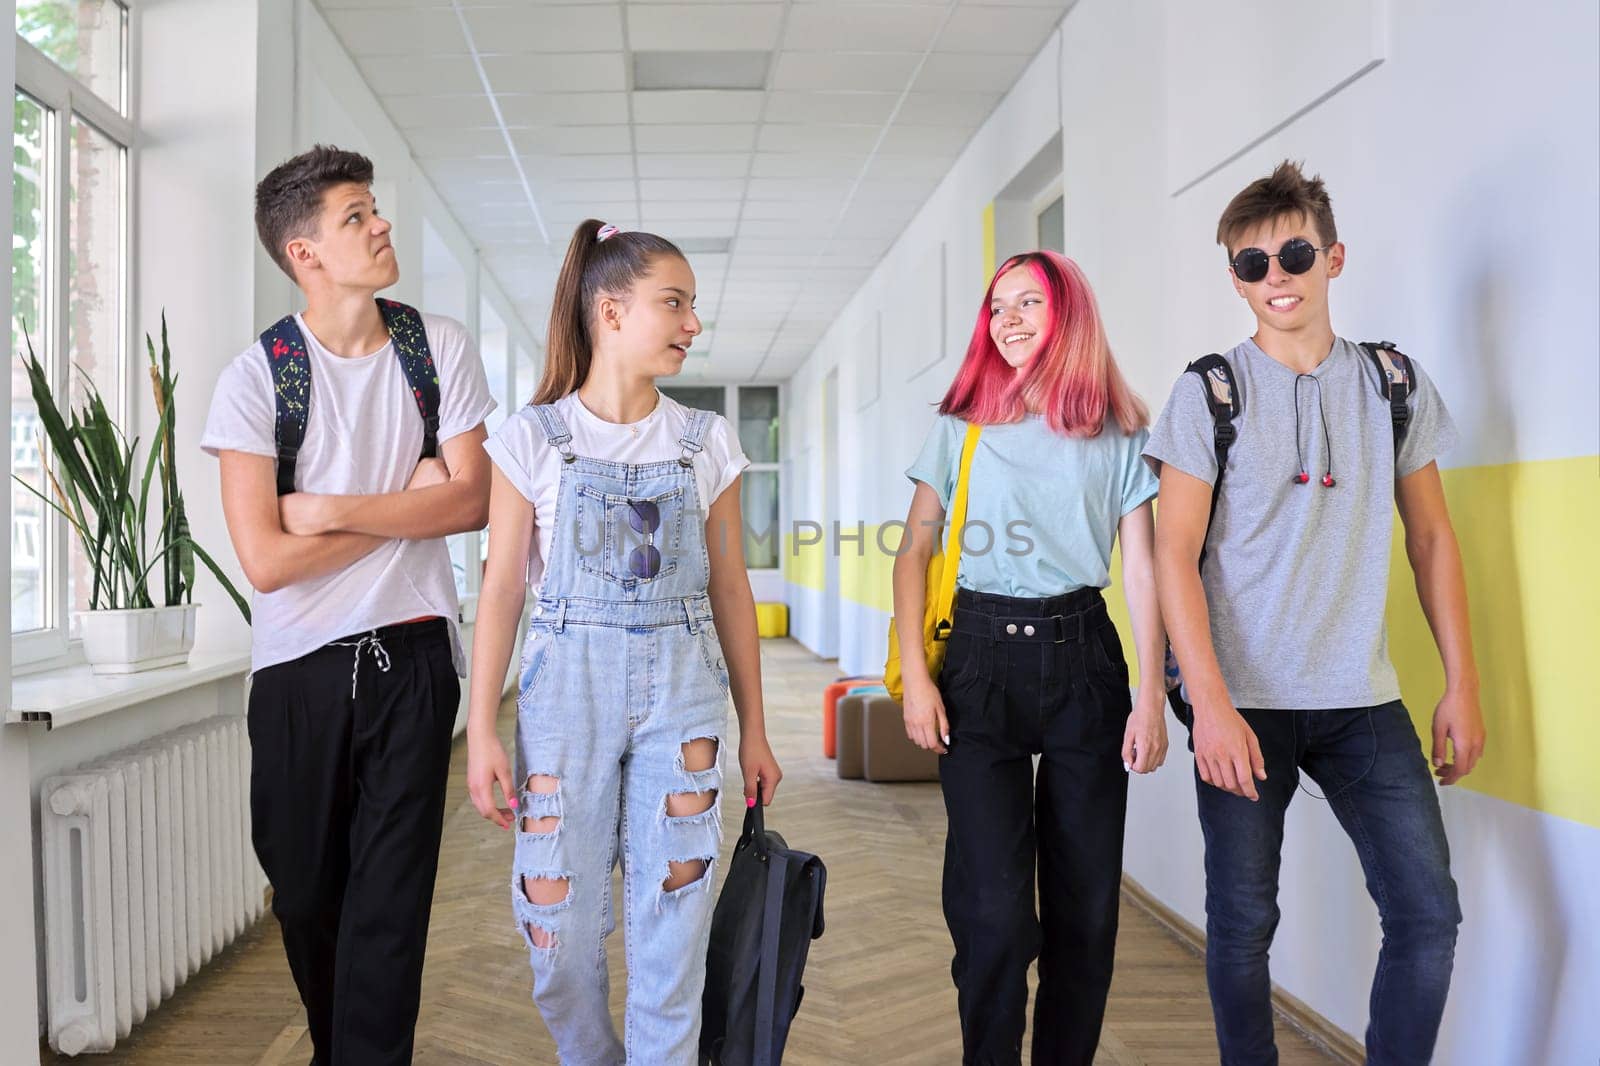 Group of teenage students walking together along school corridor, schoolchildren smiling and talking. Education, high school, adolescence concept